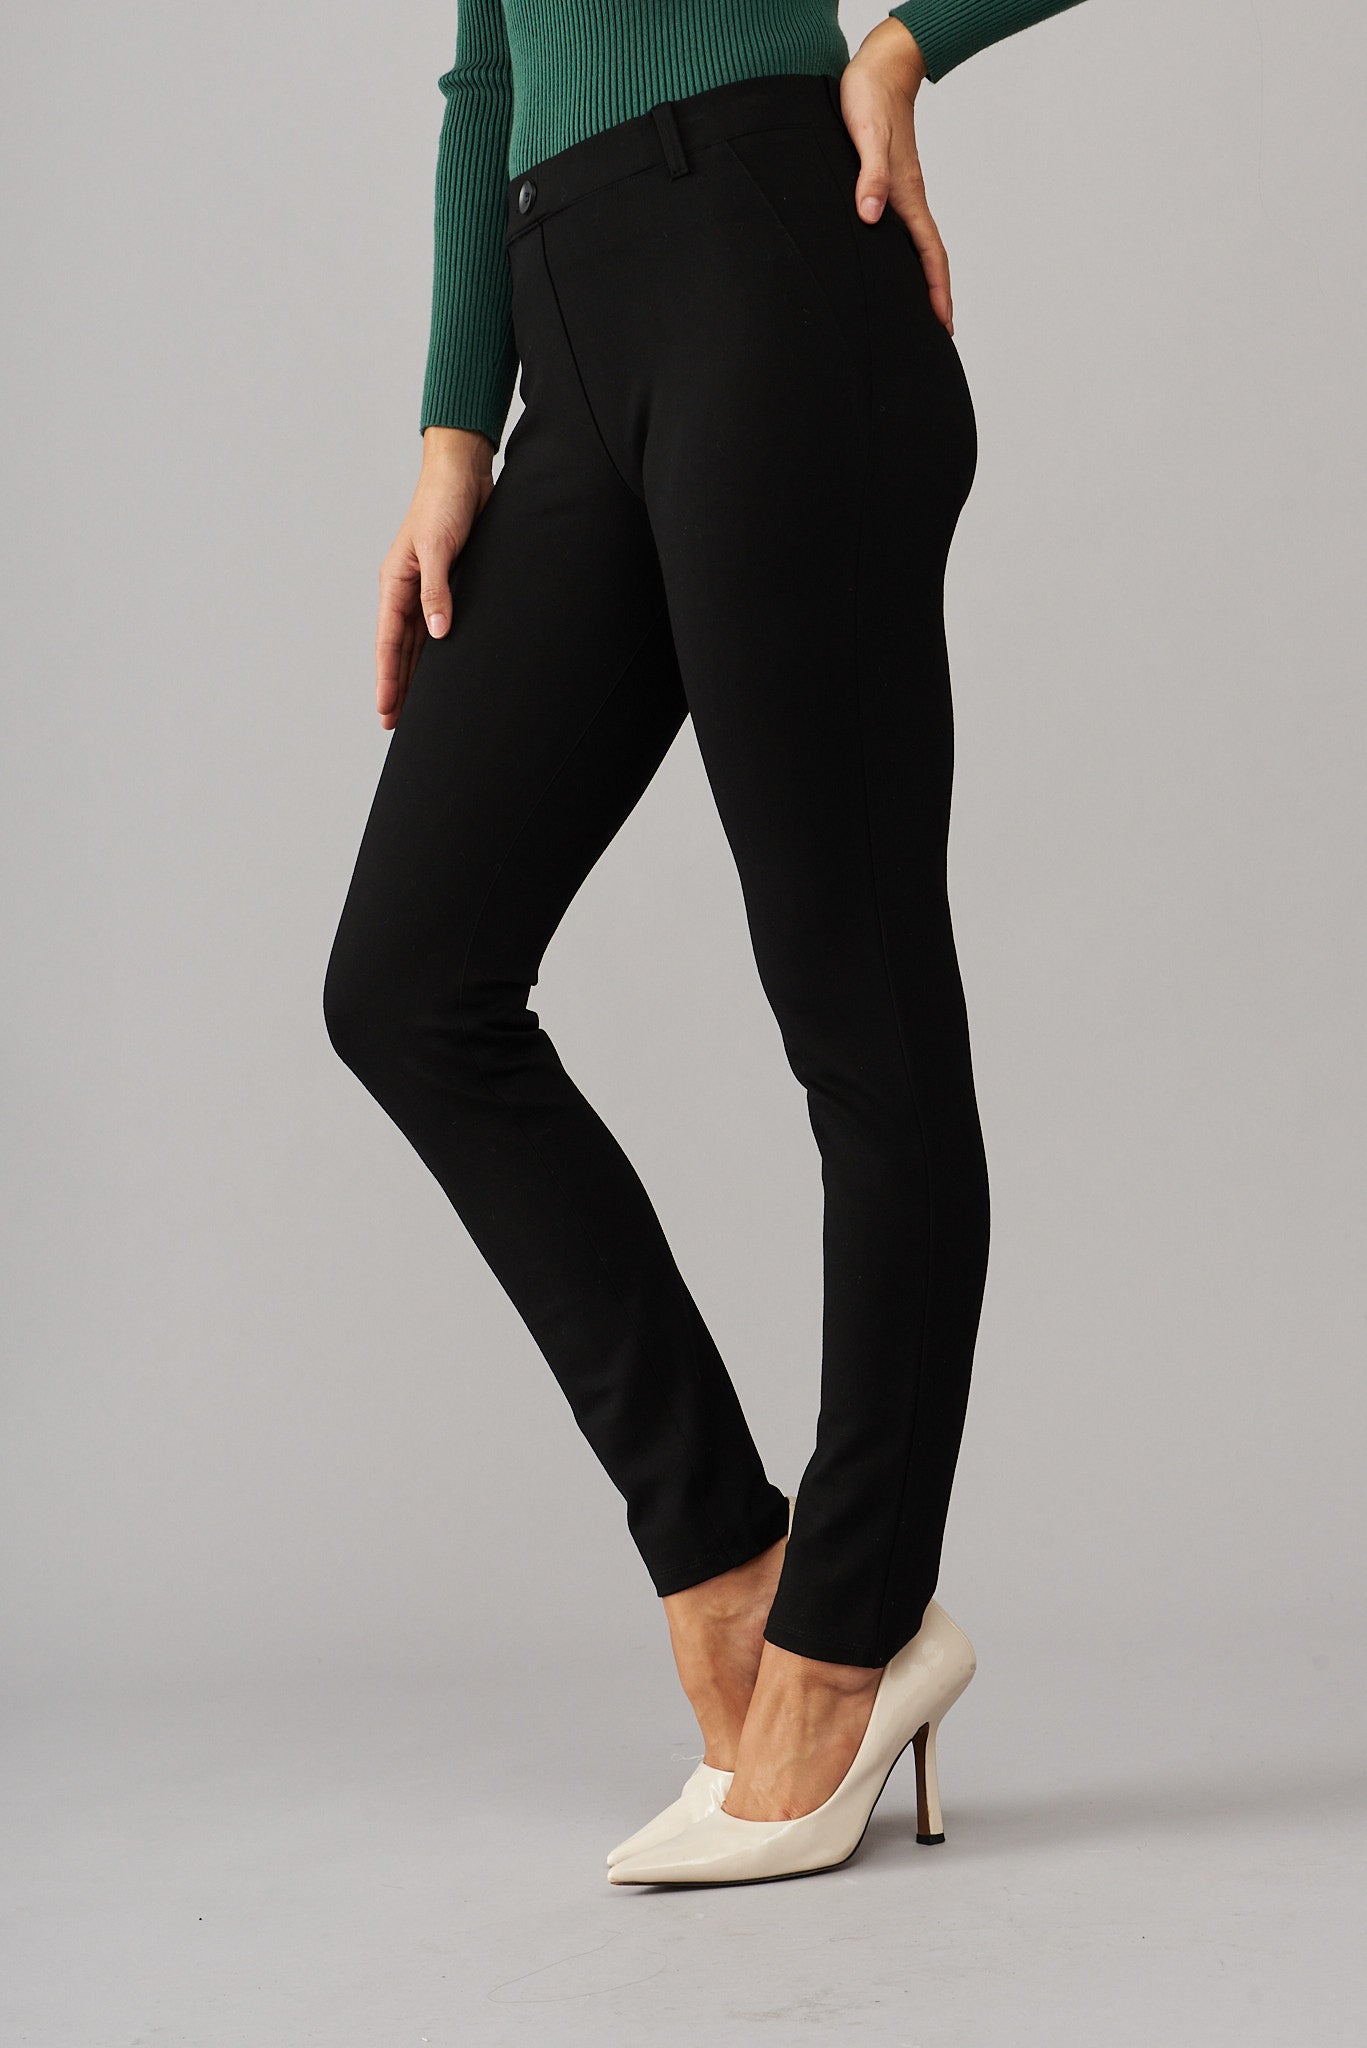 Moschino Couture Ladies Black Skinny Leggings Style Trousers | World of  Watches